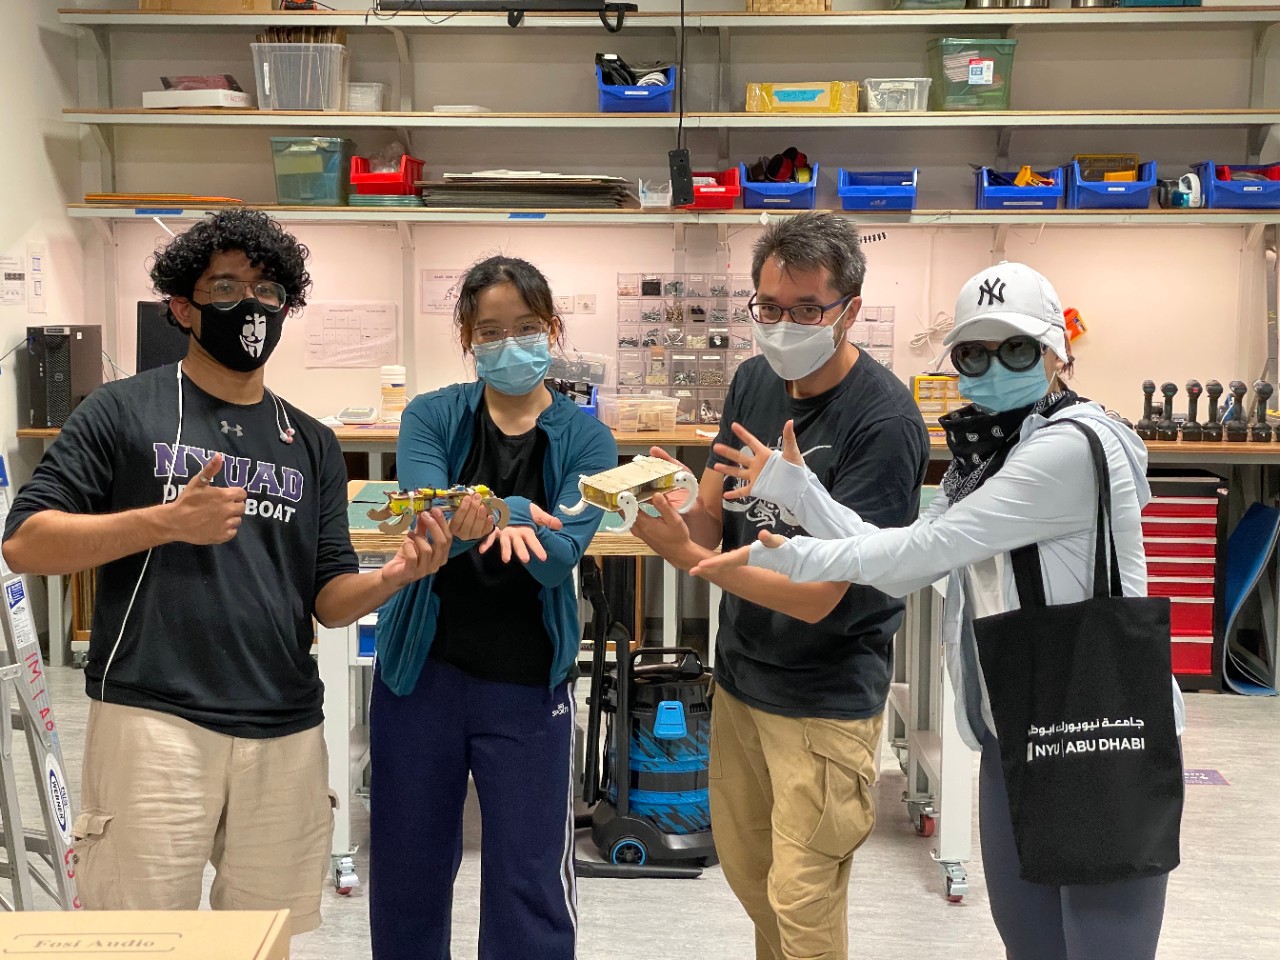 Lydia Yan, fall 2021 Undergraduate Research Assistantship award recipient, standing alongside Professor Ang and fellow students, showcasing prototype robots they created for the Interactive Media department.